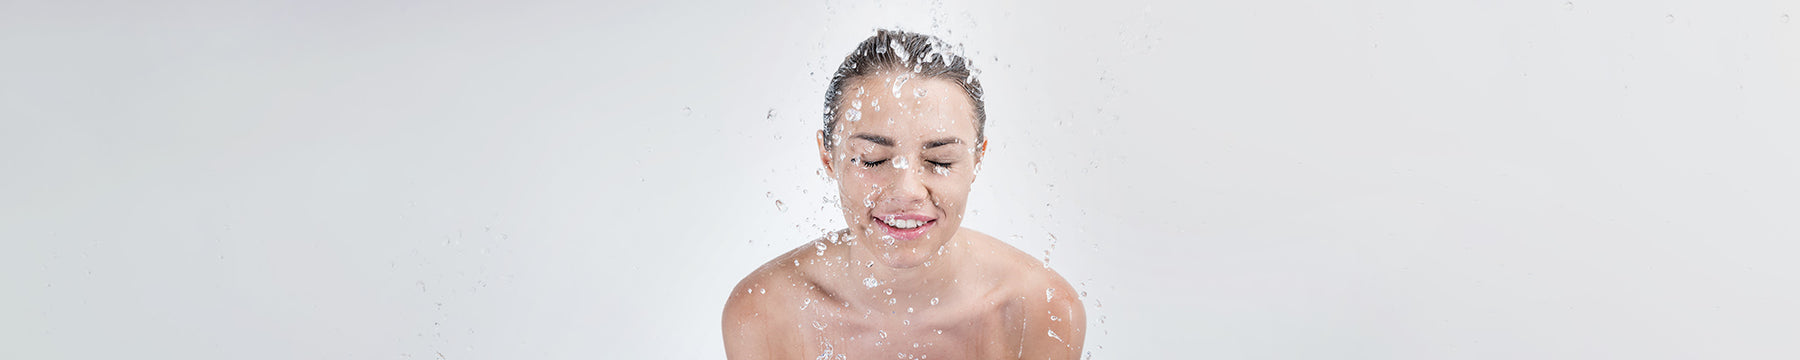 Is Cold Water Good for Your Skin?